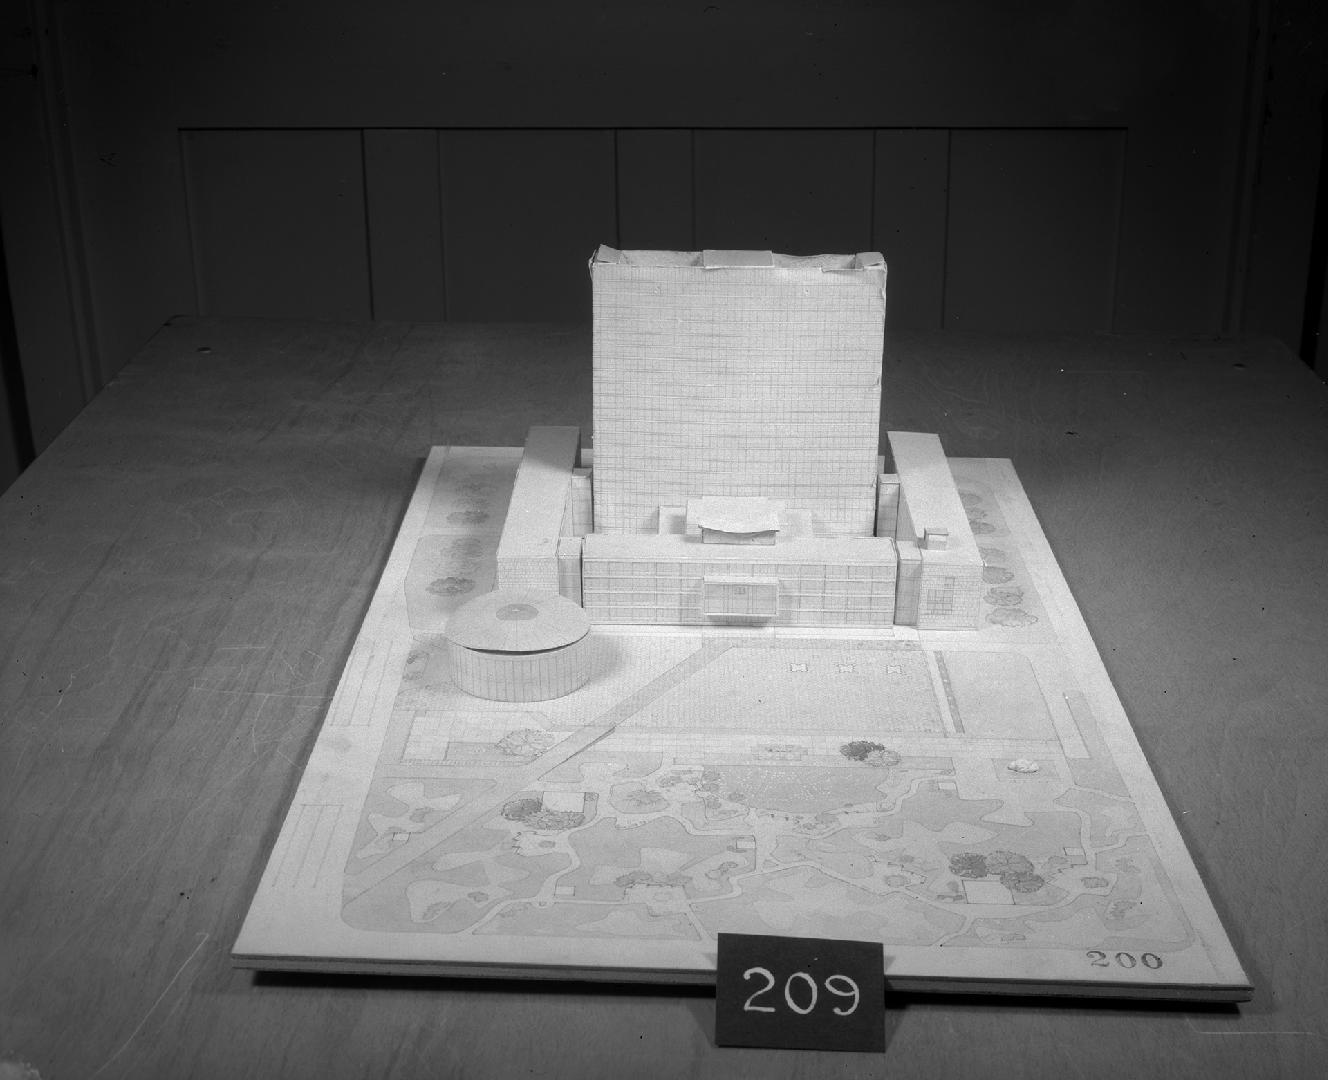 K. Waite and D. A. Stewart entry, City Hall and Square Competition, Toronto, 1958, architectural model